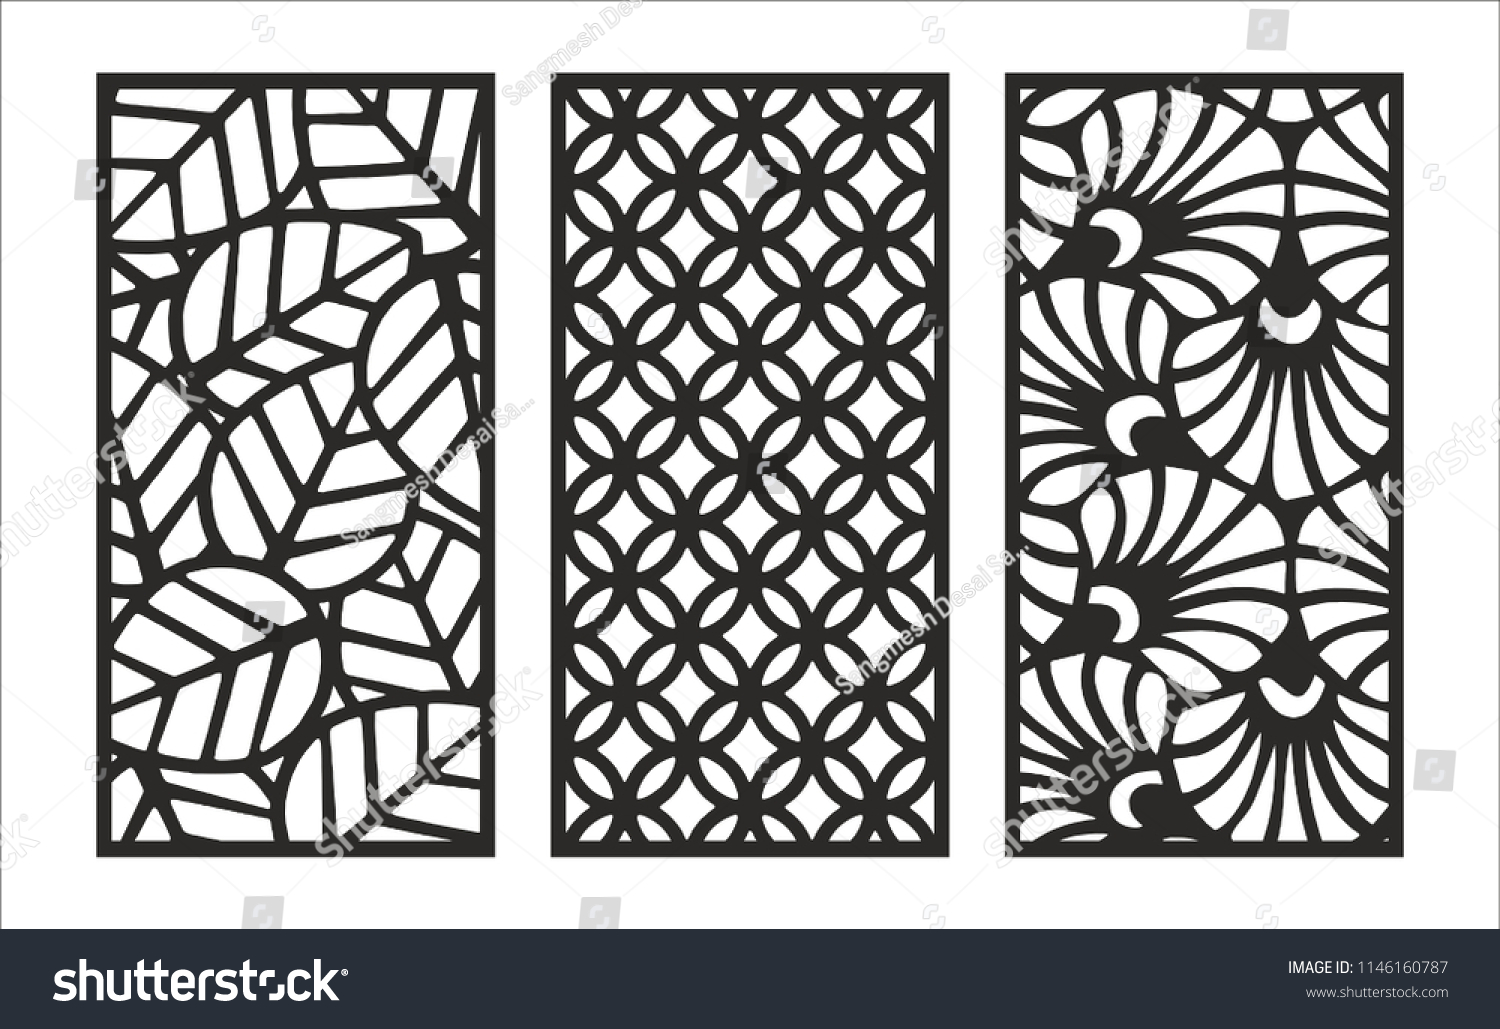 Jali Design Graphic Plywood Partition Foam Stock Vector